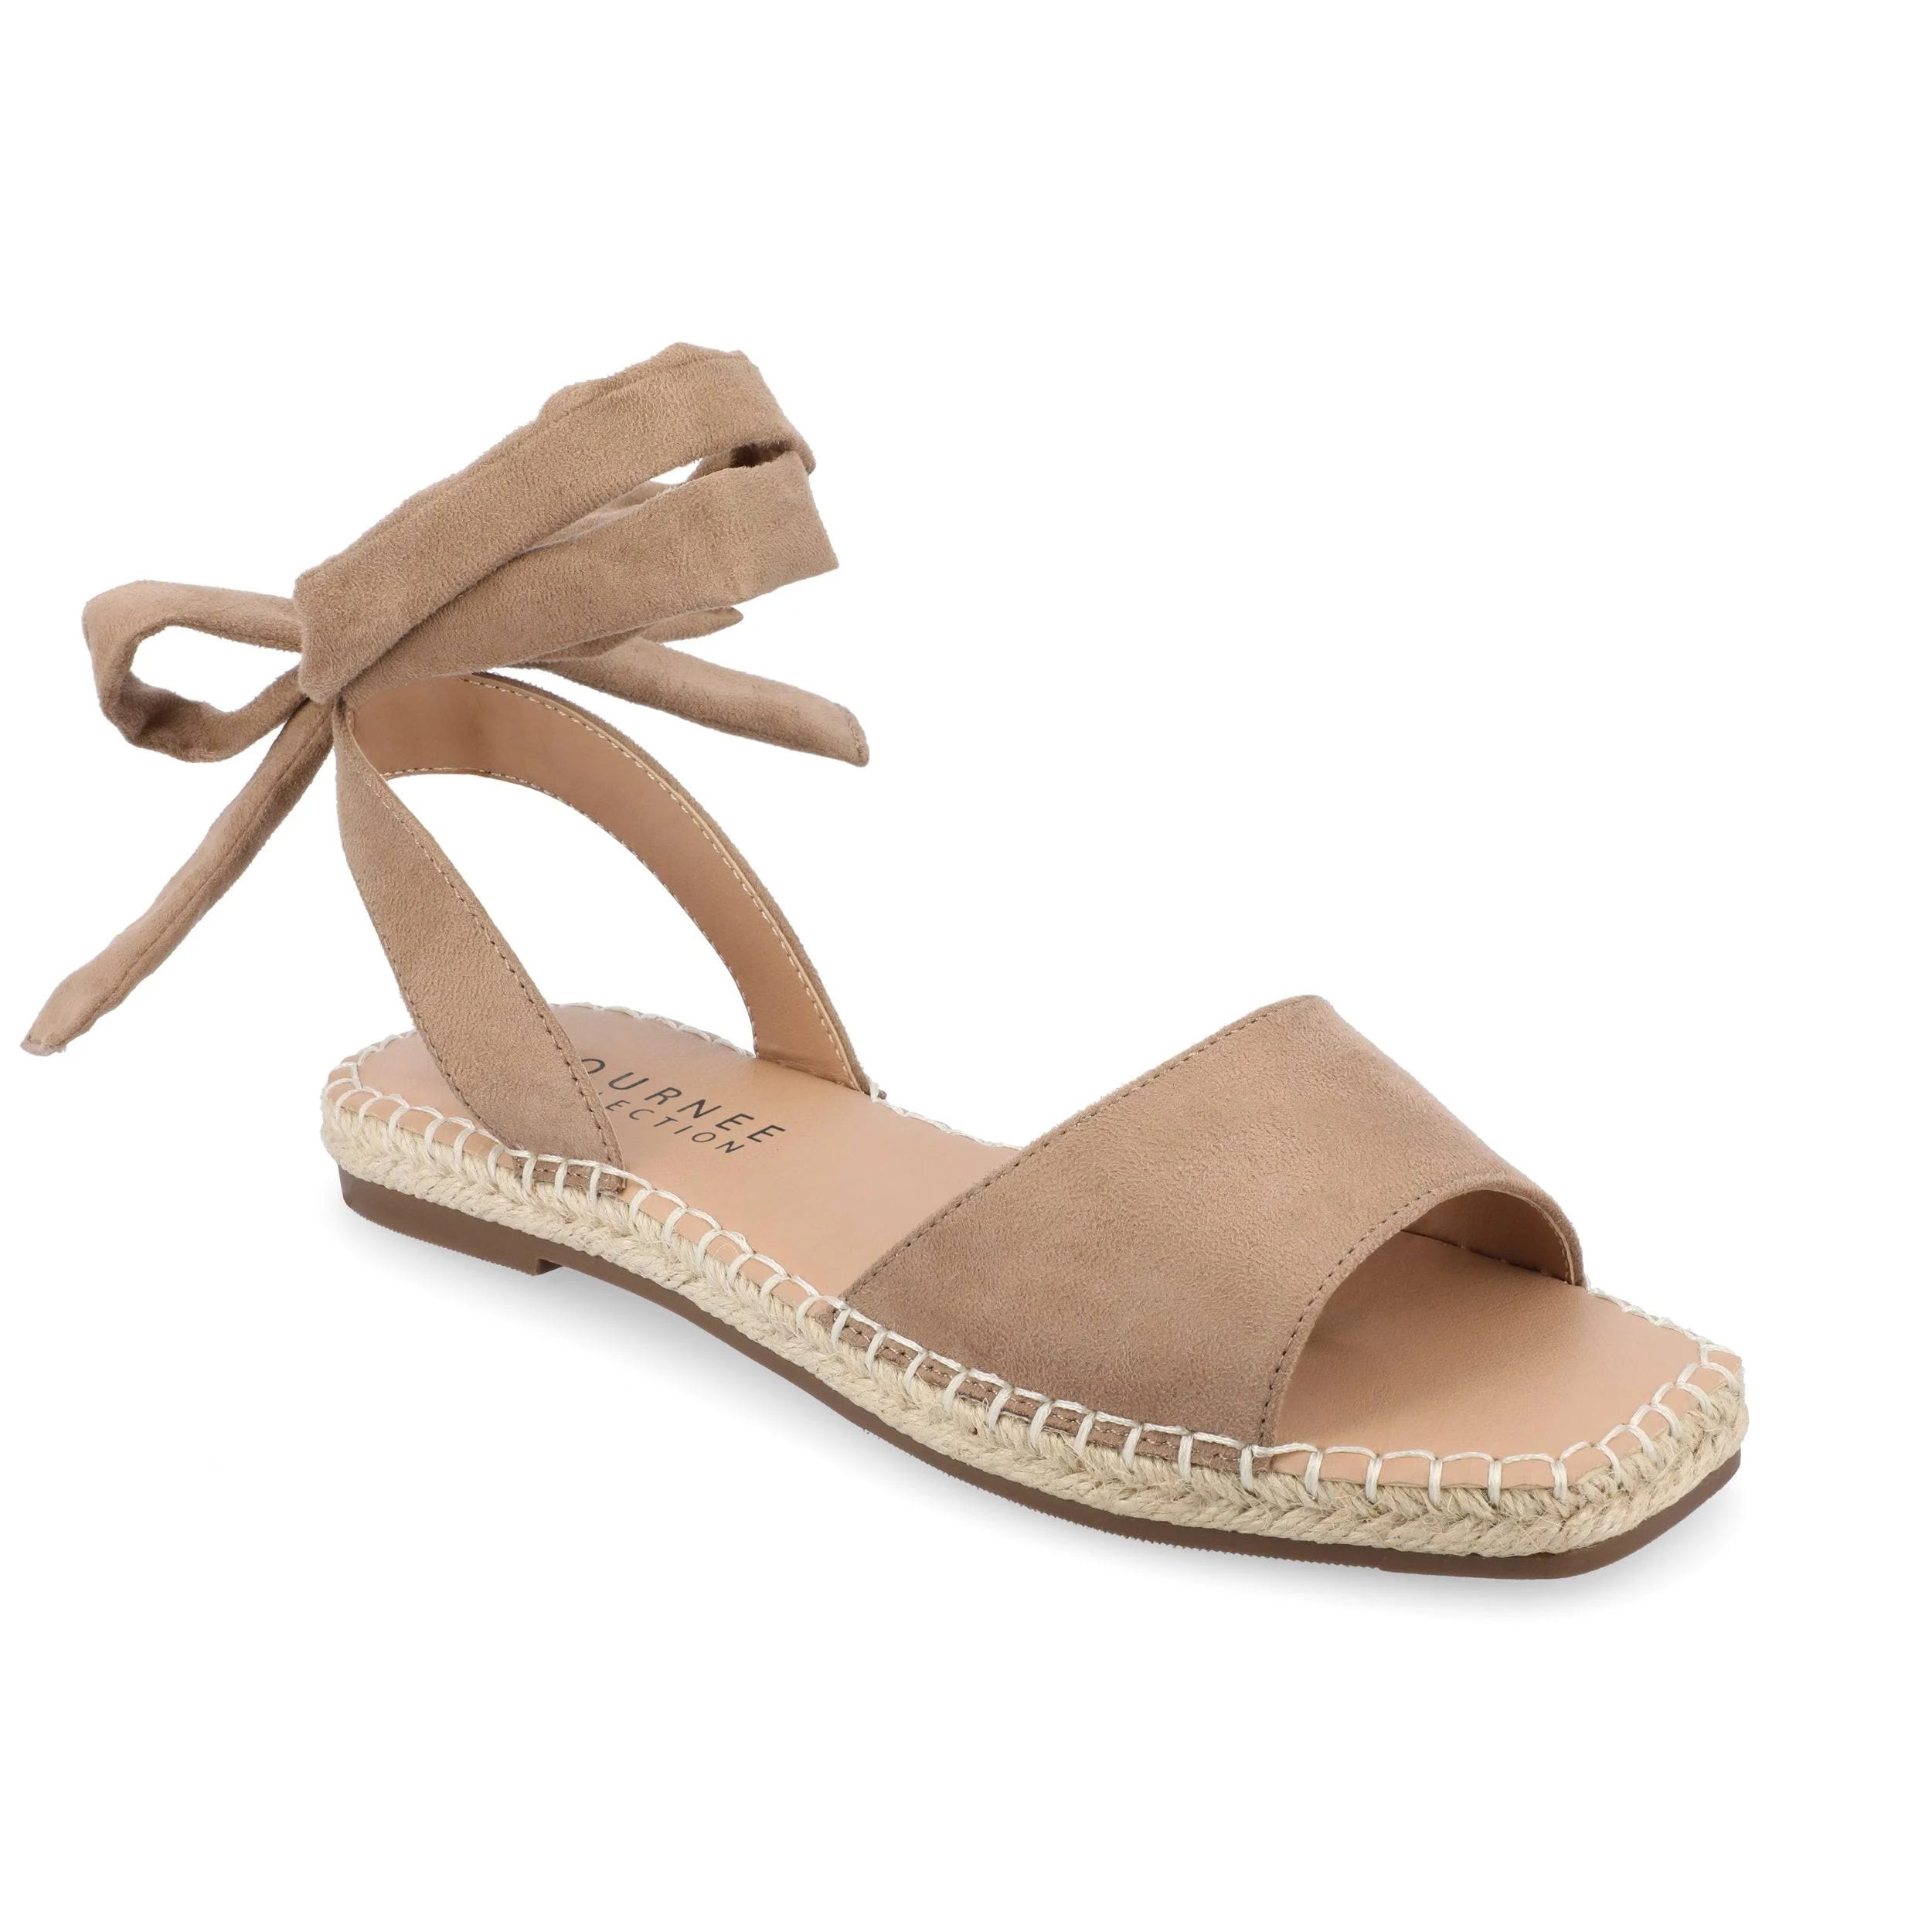 Wide Width Espadrille Sandals with Premium Faux Suede for All-Day Comfort | Image